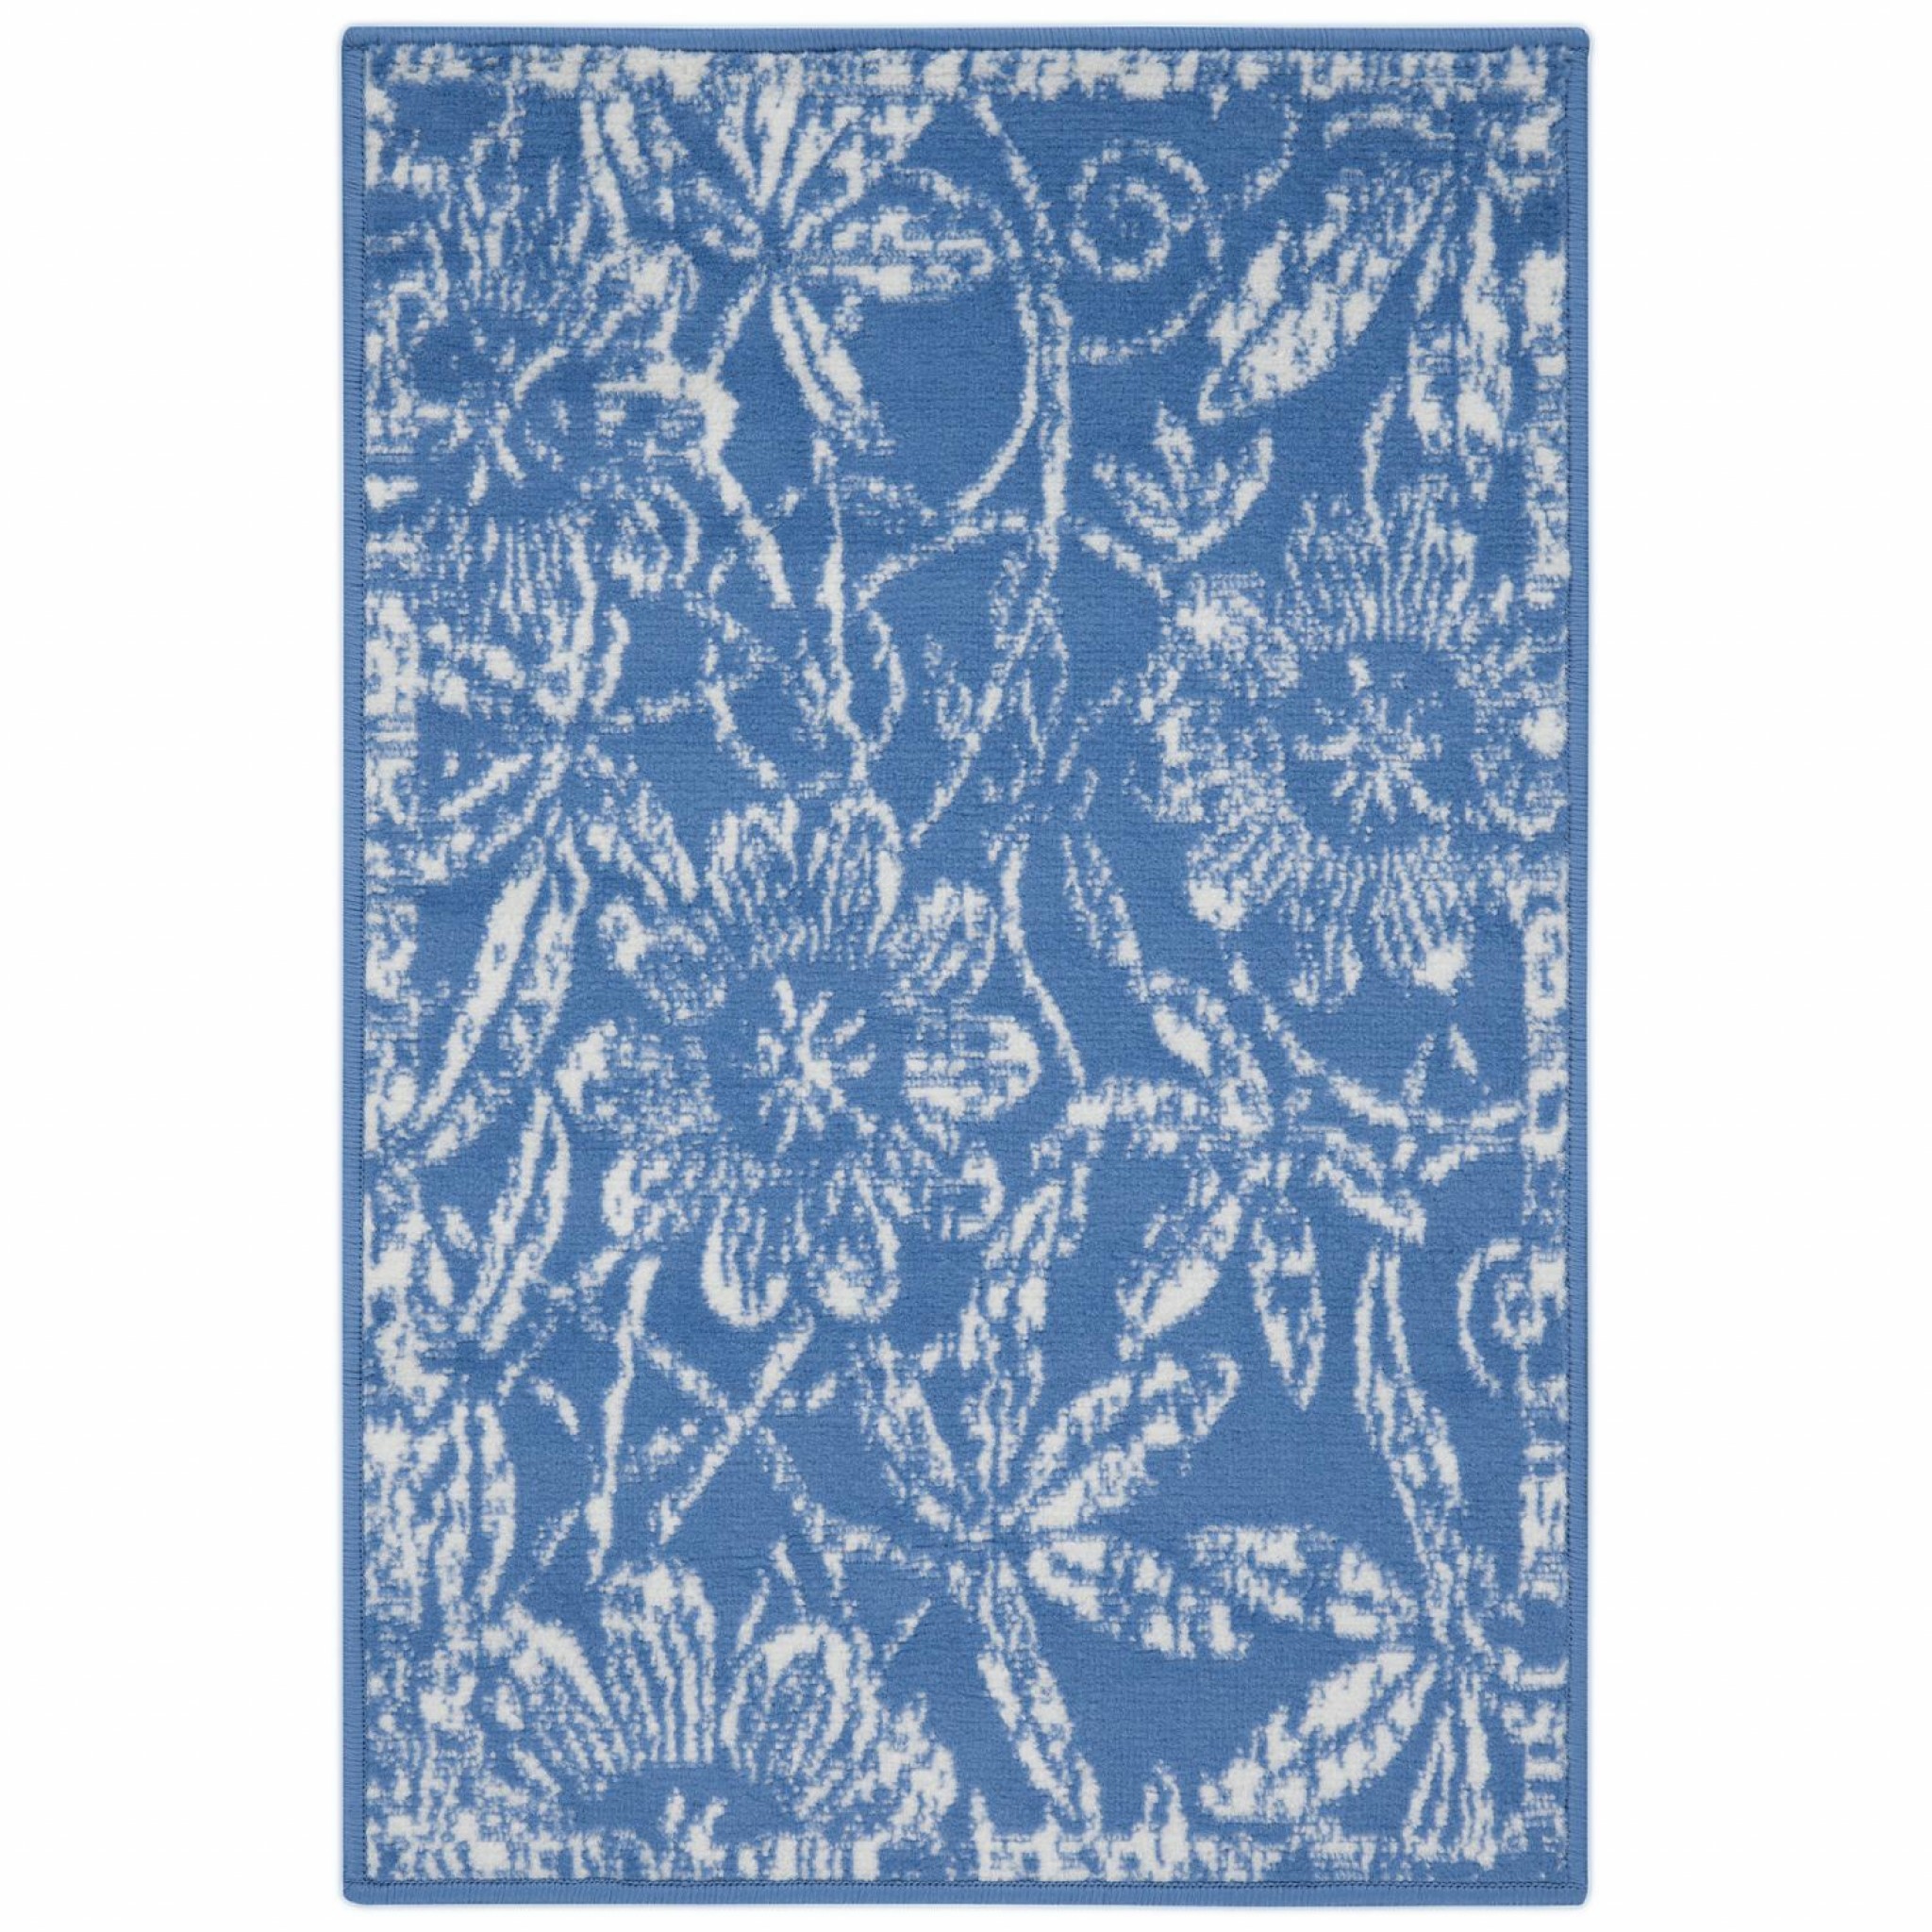 5' X 7' Blue Floral Dhurrie Area Rug-385845-1